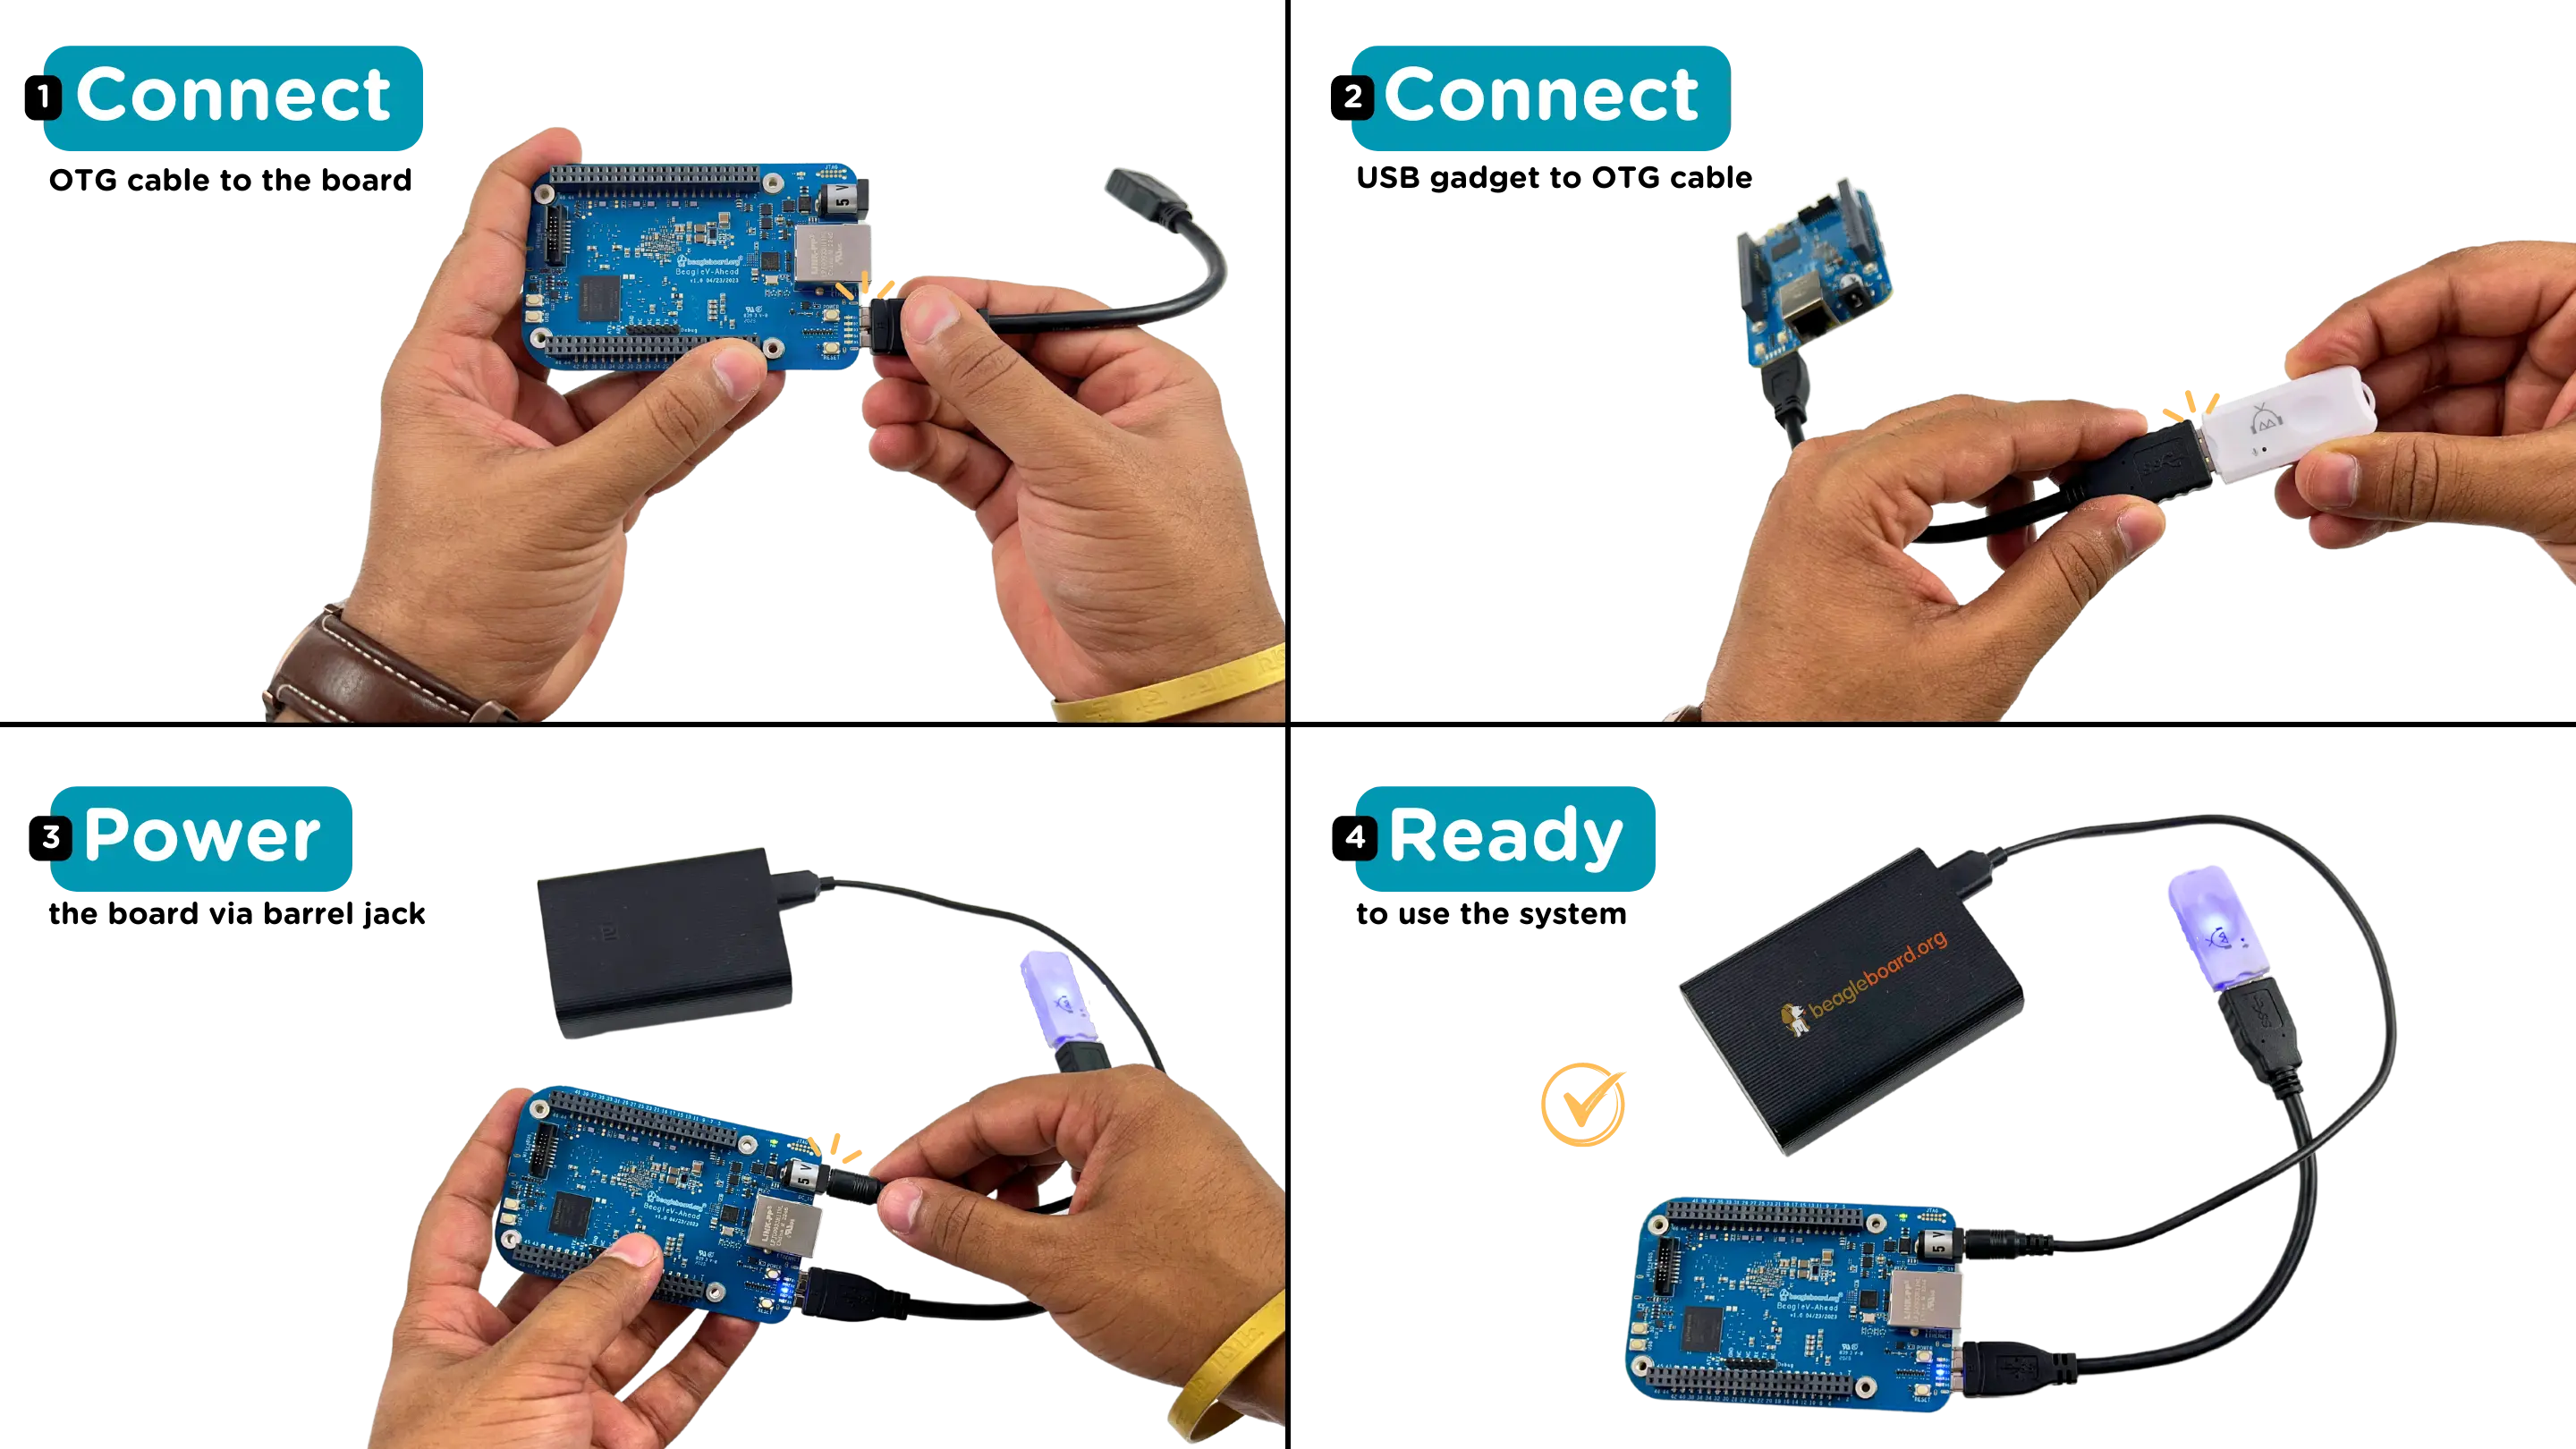 USB OTG to connect USB gadgets to BeagleV Ahead board